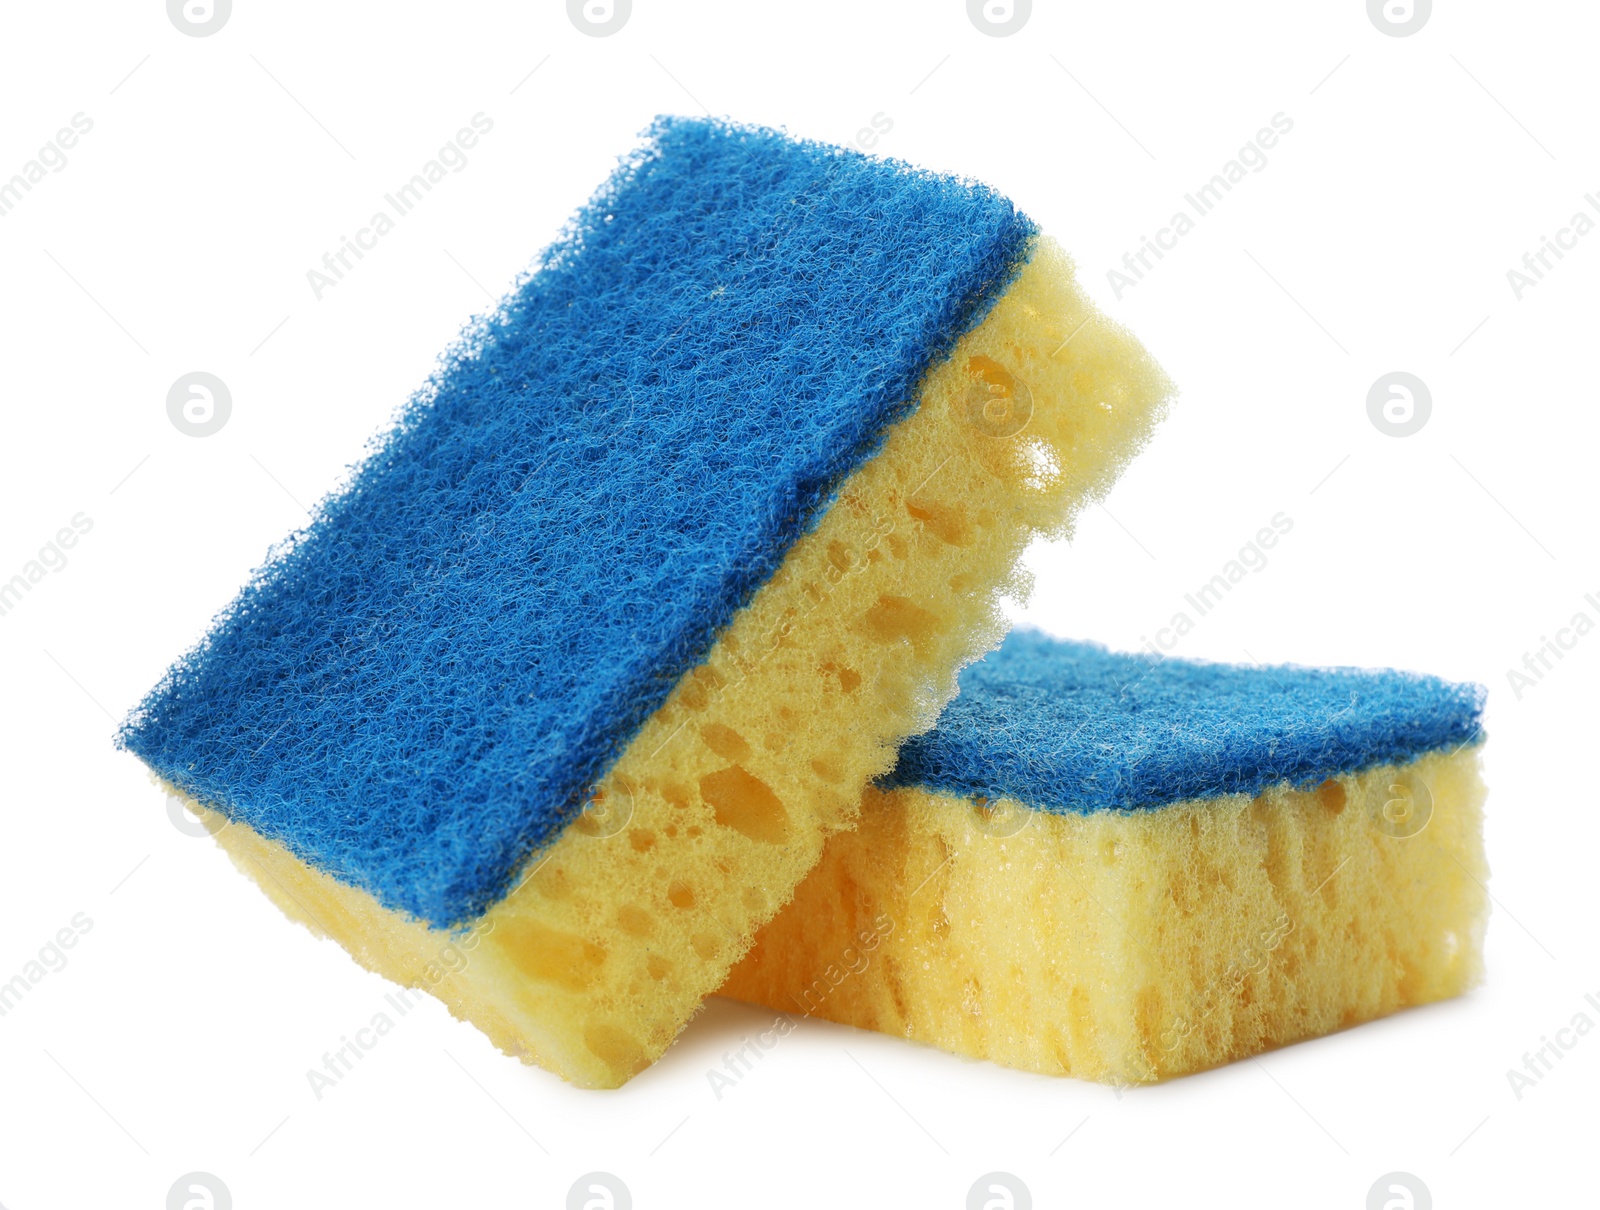 Photo of Yellow cleaning sponges with abrasive light blue scourers on white background